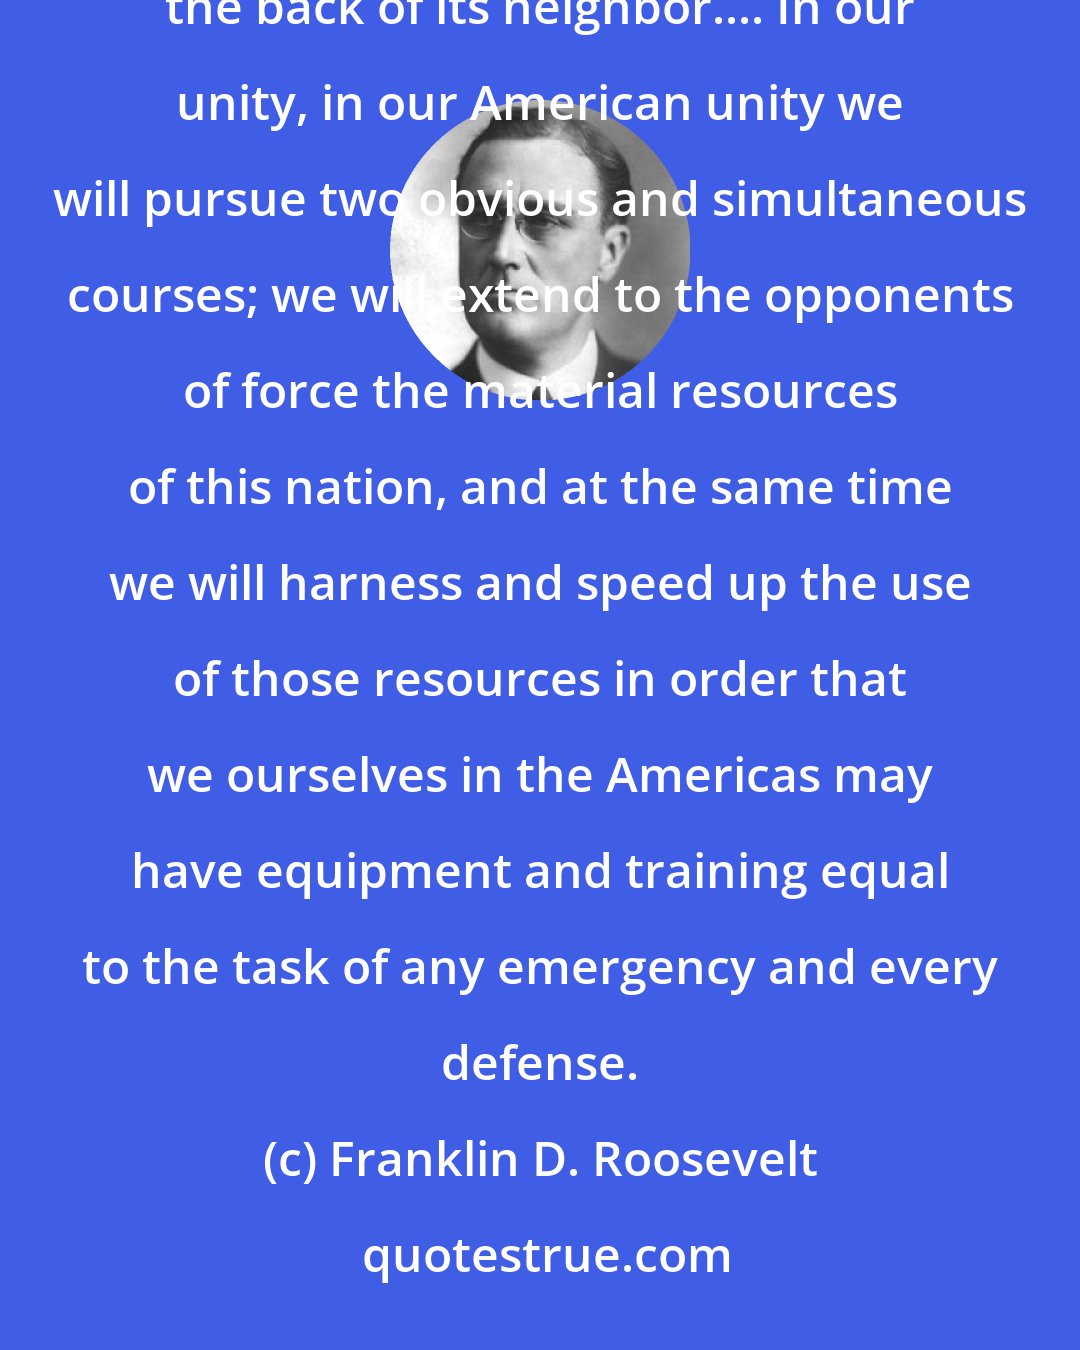 Franklin D. Roosevelt: On this tenth day of June, nineteen hundred and forty, the hand that held the dagger has struck it into the back of its neighbor.... In our unity, in our American unity we will pursue two obvious and simultaneous courses; we will extend to the opponents of force the material resources of this nation, and at the same time we will harness and speed up the use of those resources in order that we ourselves in the Americas may have equipment and training equal to the task of any emergency and every defense.